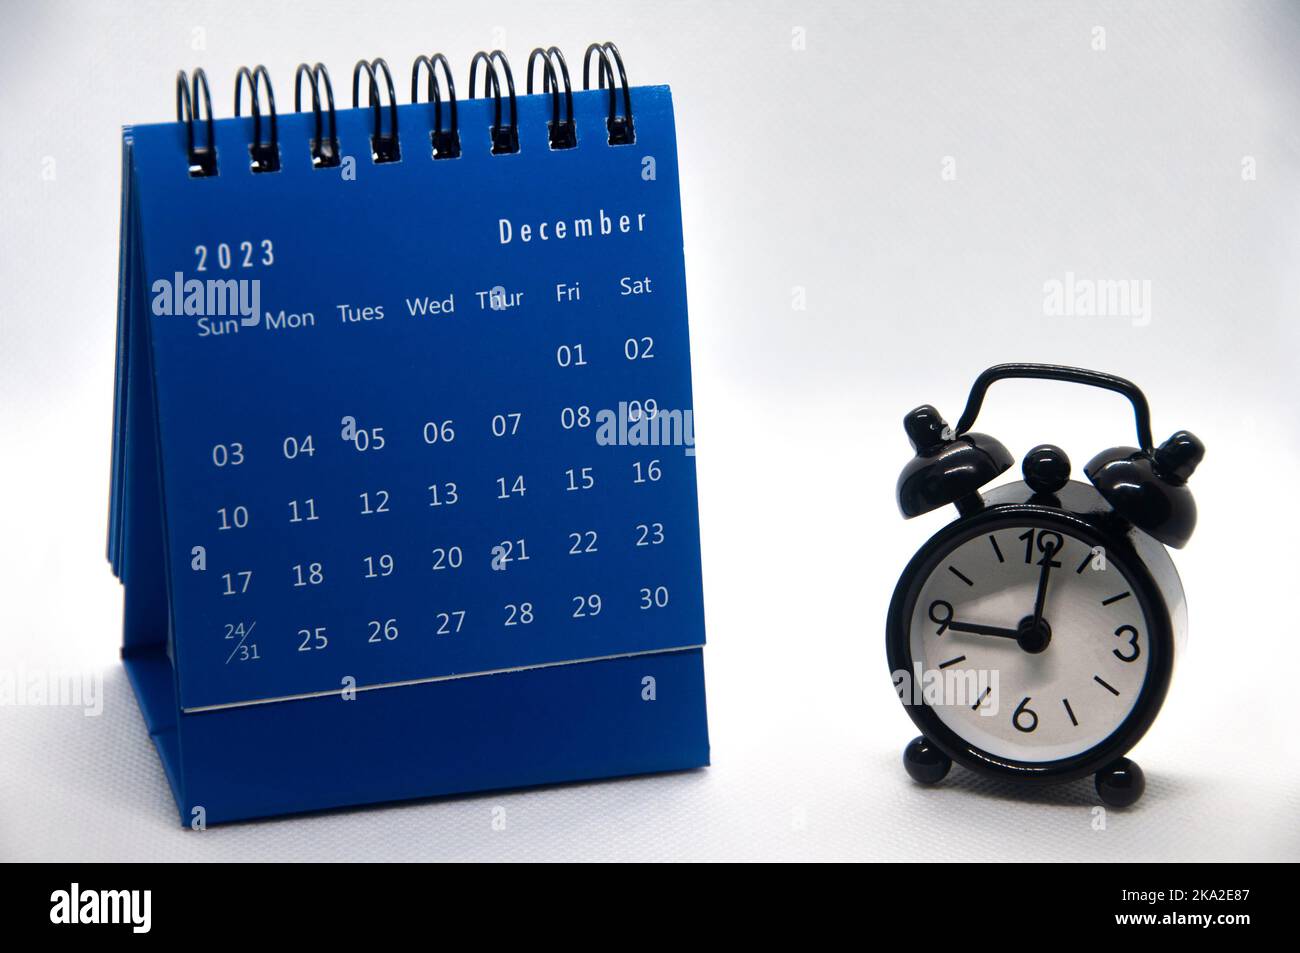 Alarm clock pointing at 9 o'clock with December 2023 calendar on white background. Time and calendar concept. Stock Photo